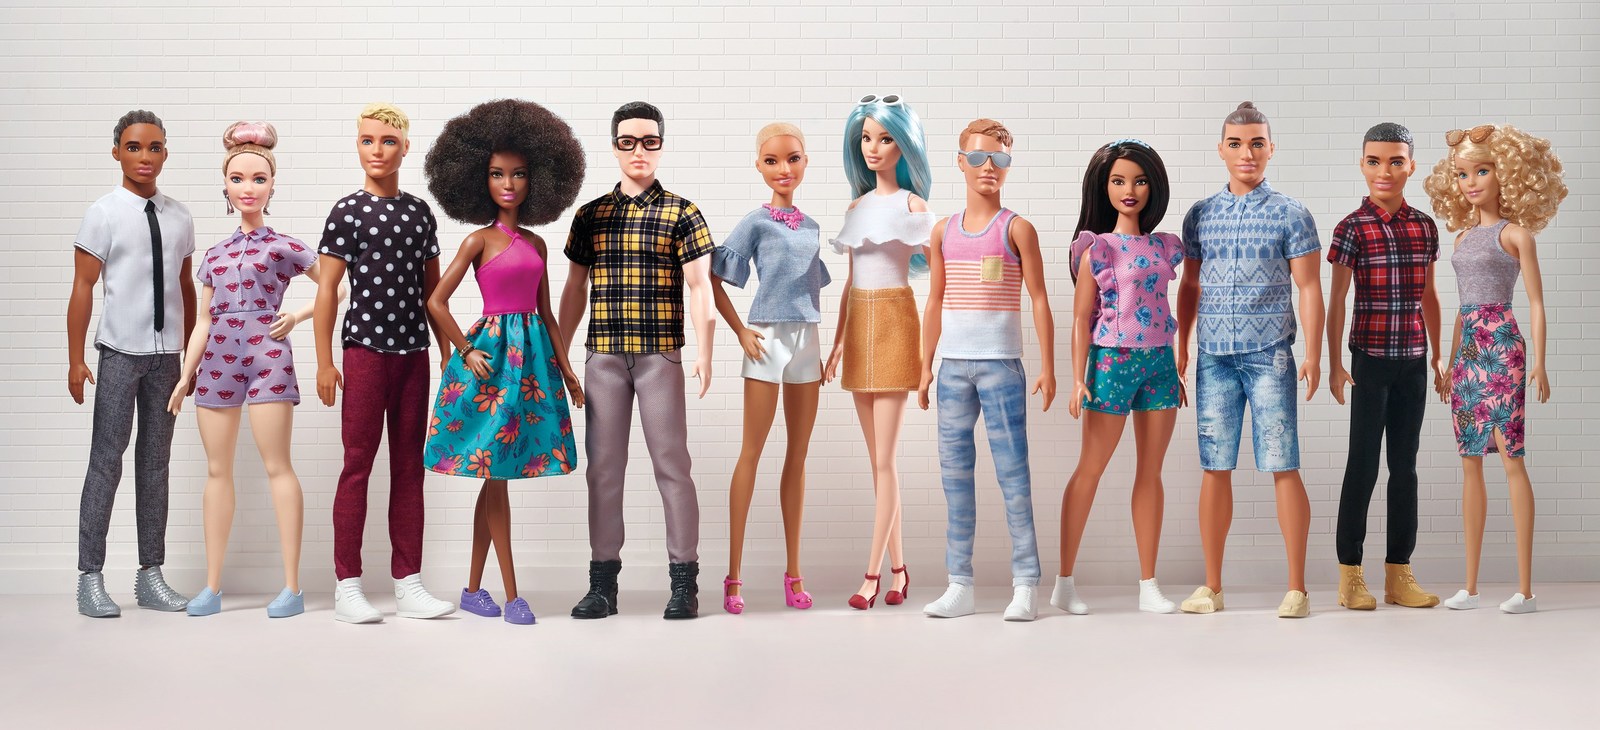 New Barbie Doll Lineup Lets Ken Settle Into His Dad-Bod, Live Out His Man-Bun Fantasy